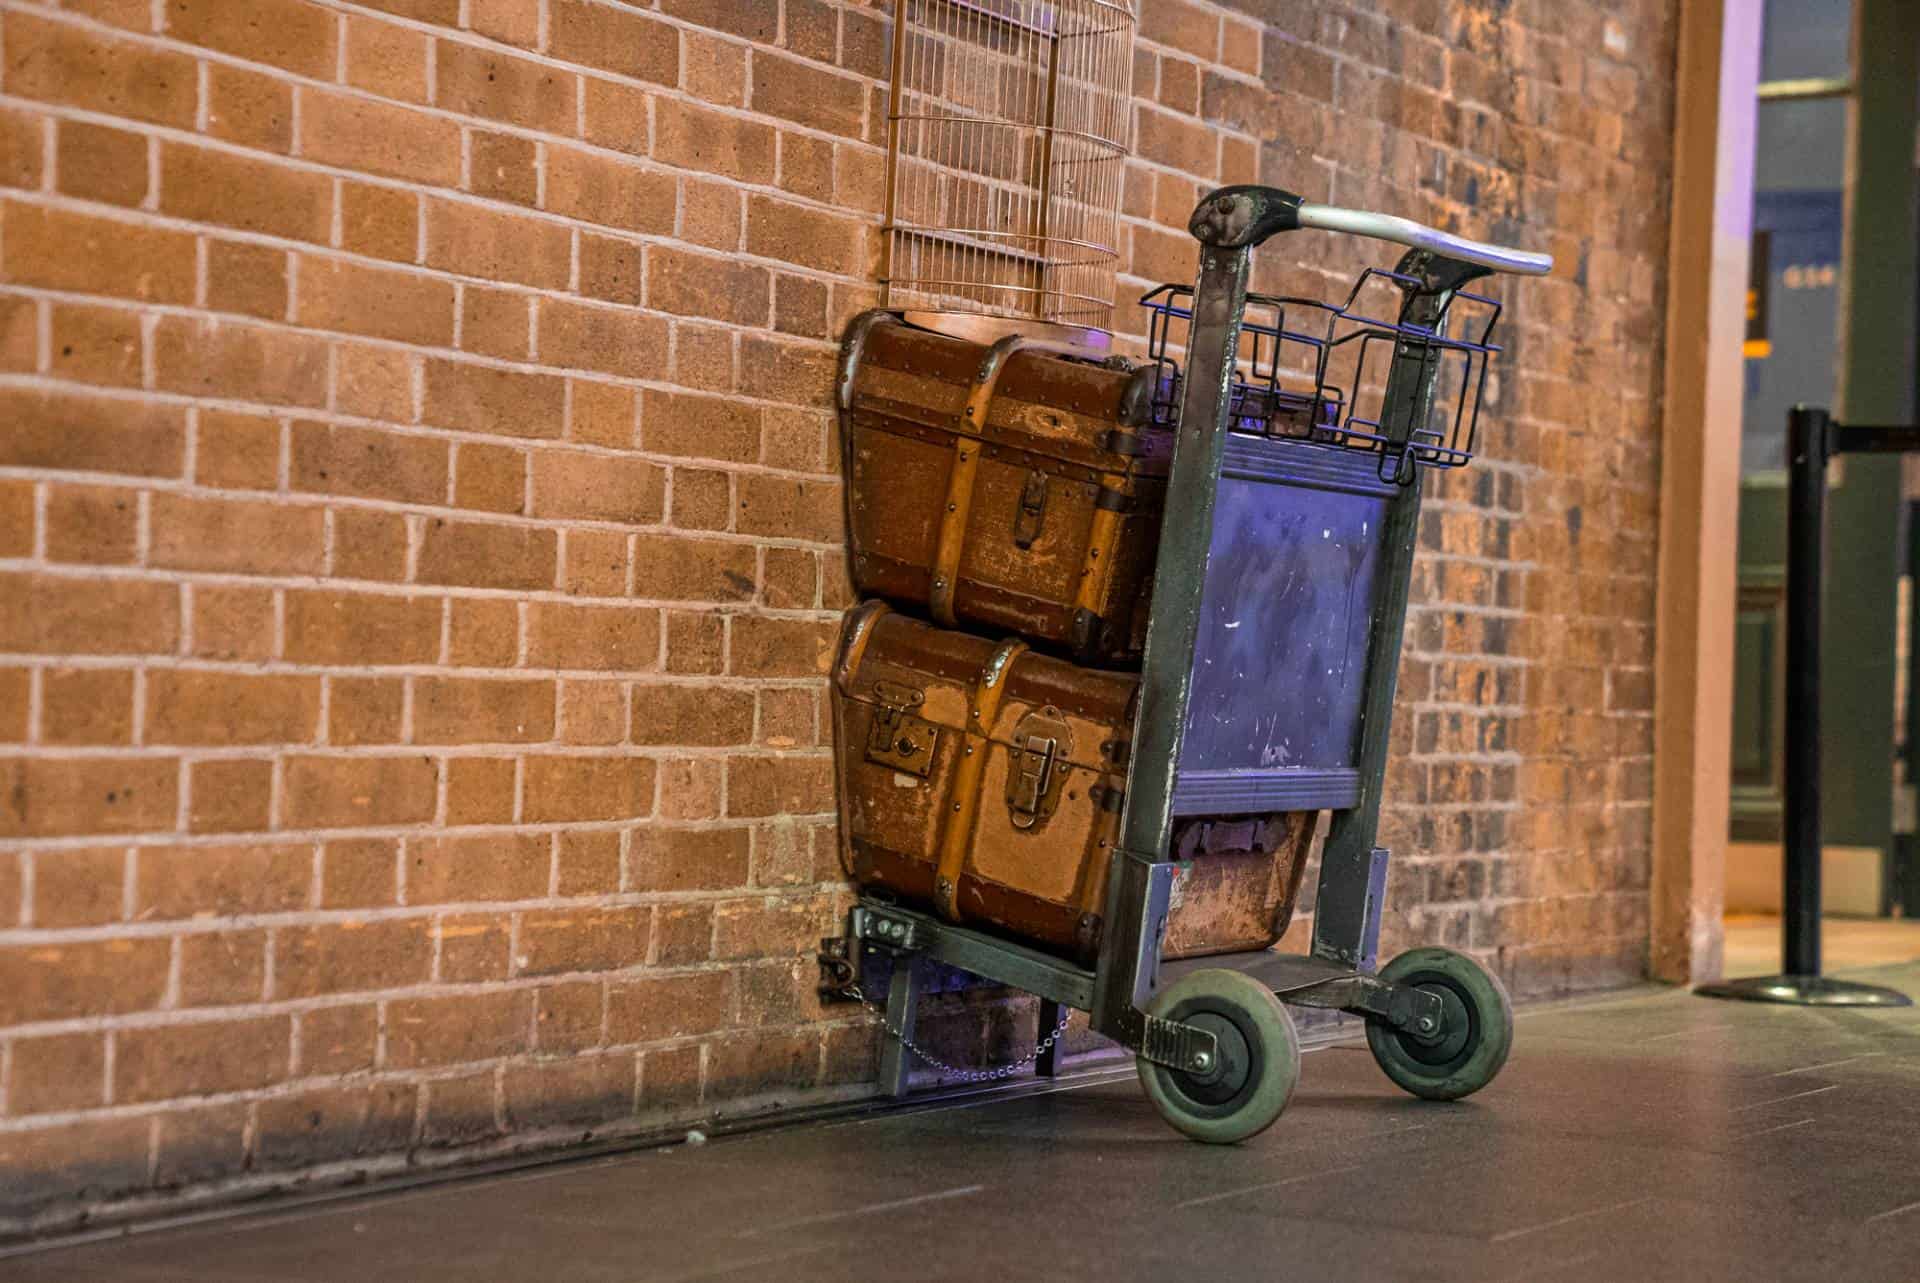 Which train station is Platform 9¾ located (from Harry Potter)?